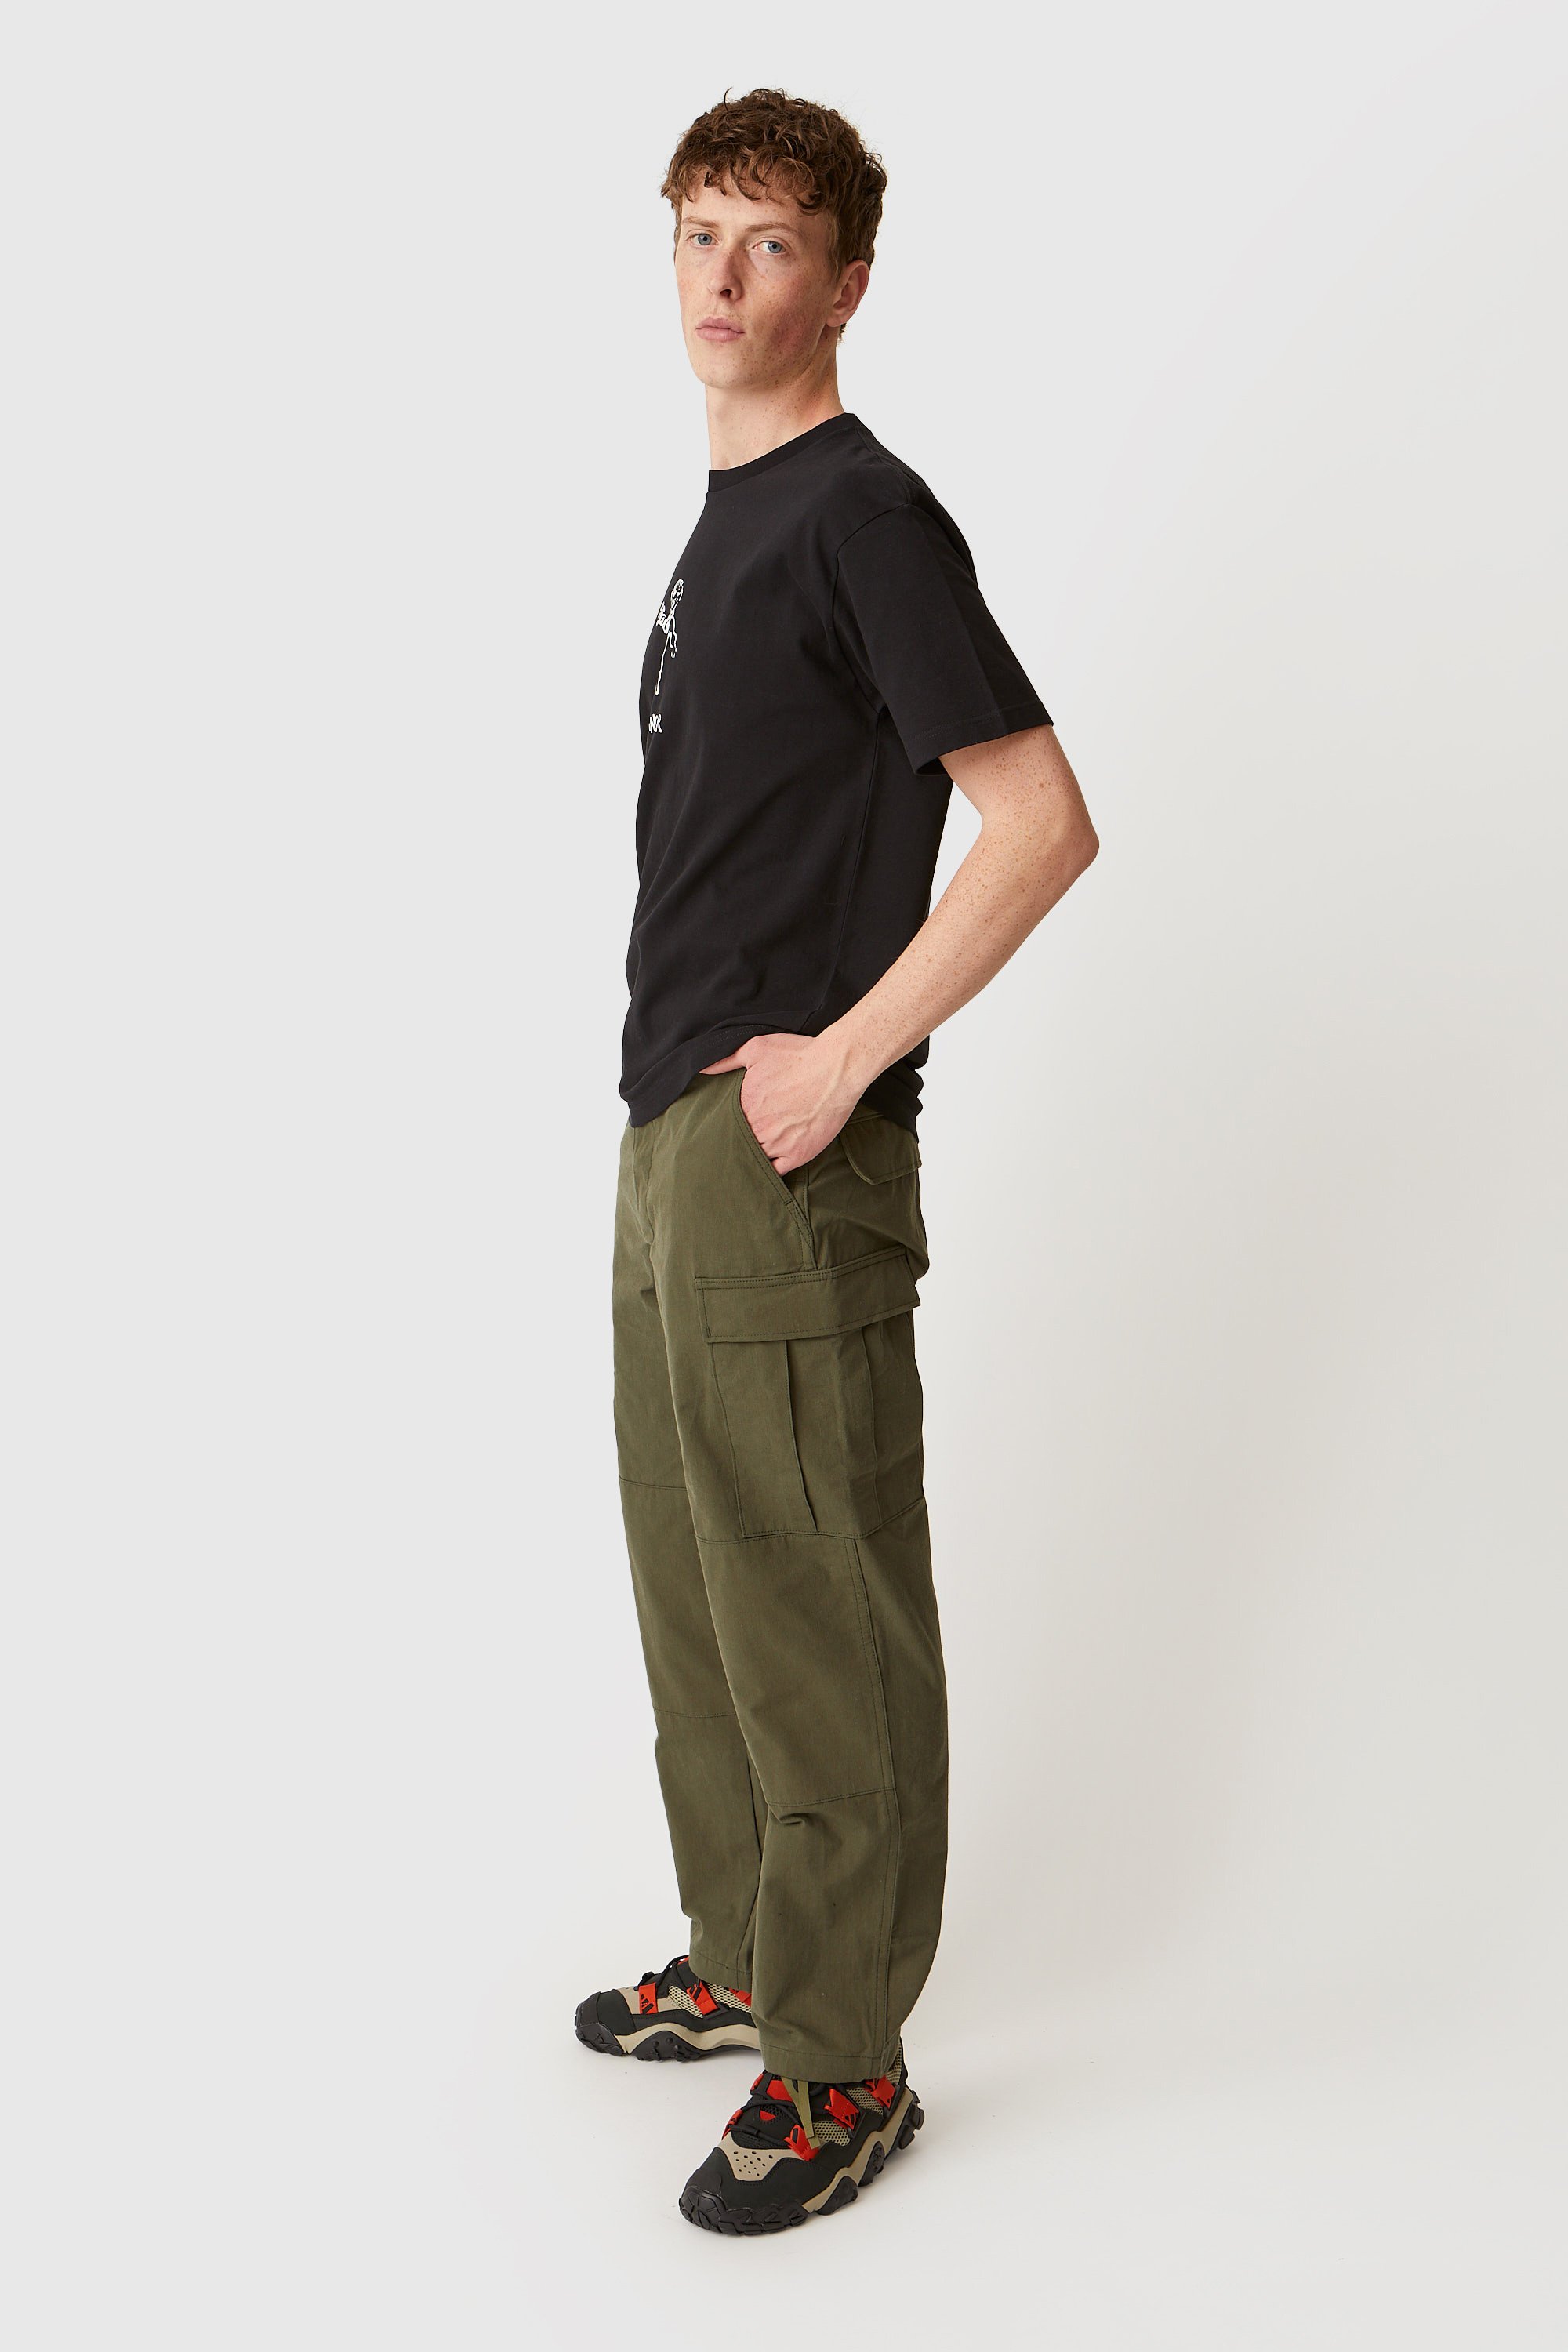 WTAPS Wmill-Trousers 01 / Trousers Olive drab | WoodWood.com